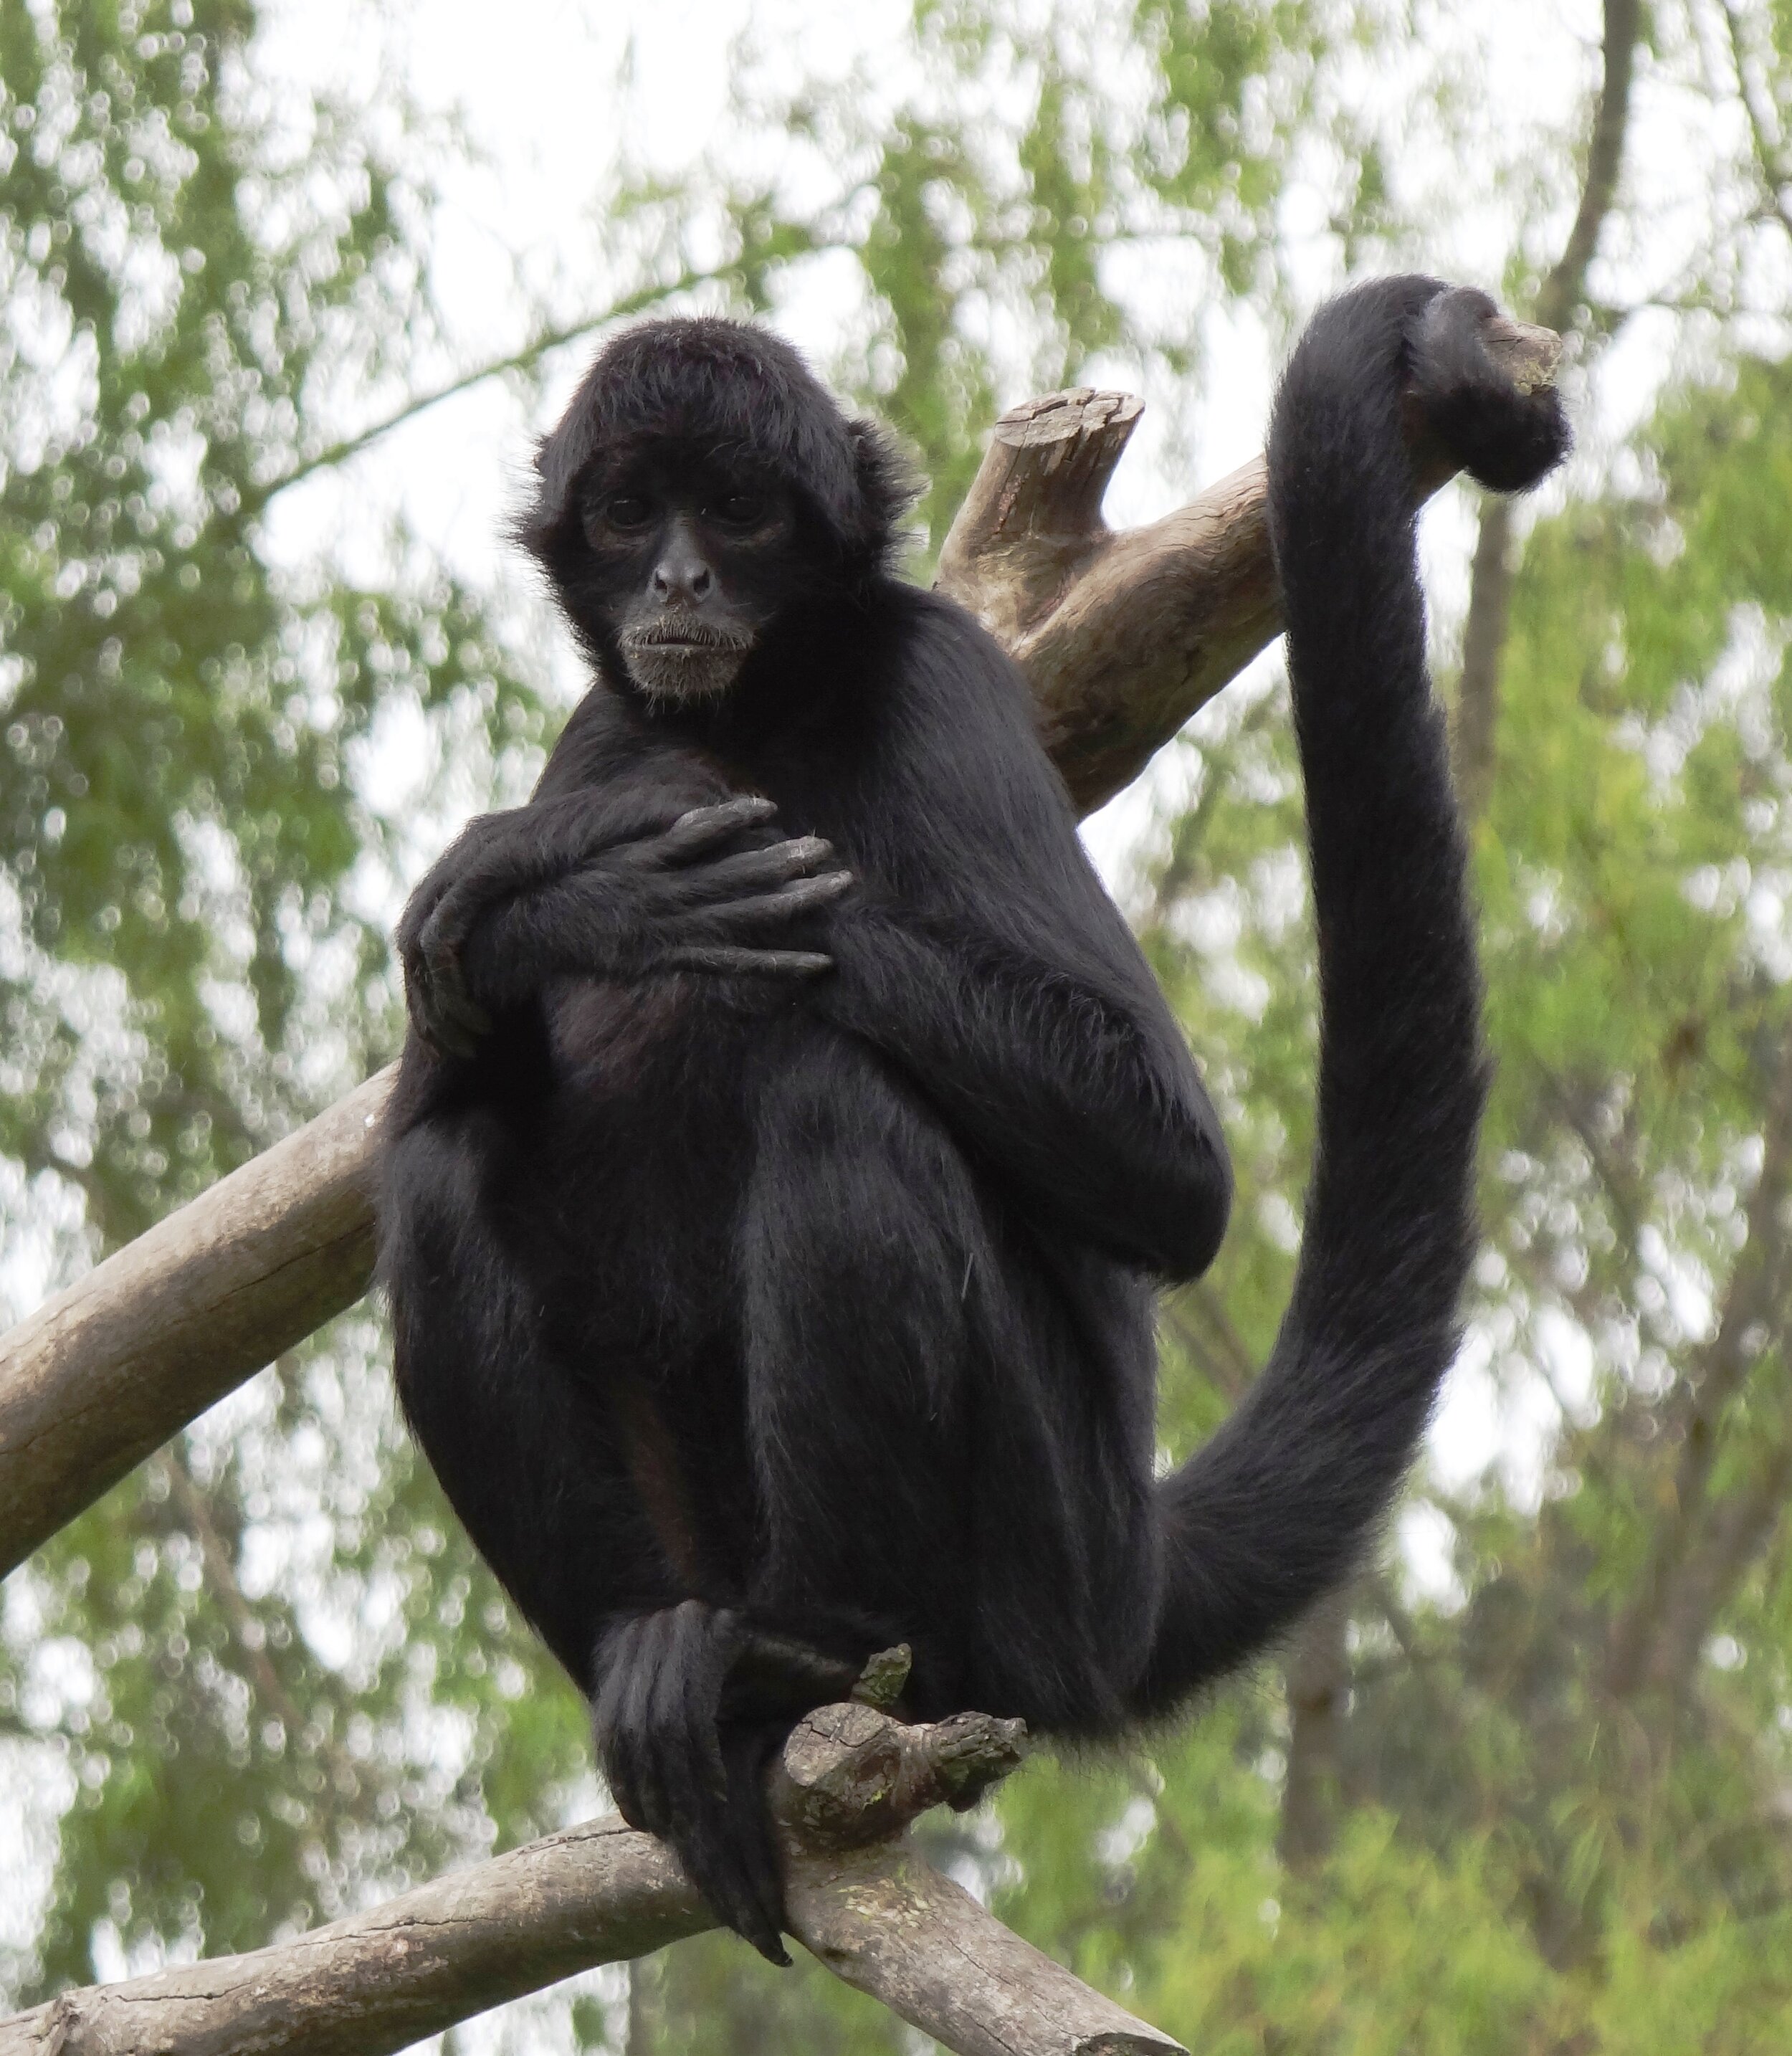 Petruss_Spider monkey with long arms ( Ateles fusciceps ) at the Jaime Duque Park Zoo, Cundinamarca, Colombia.jpeg